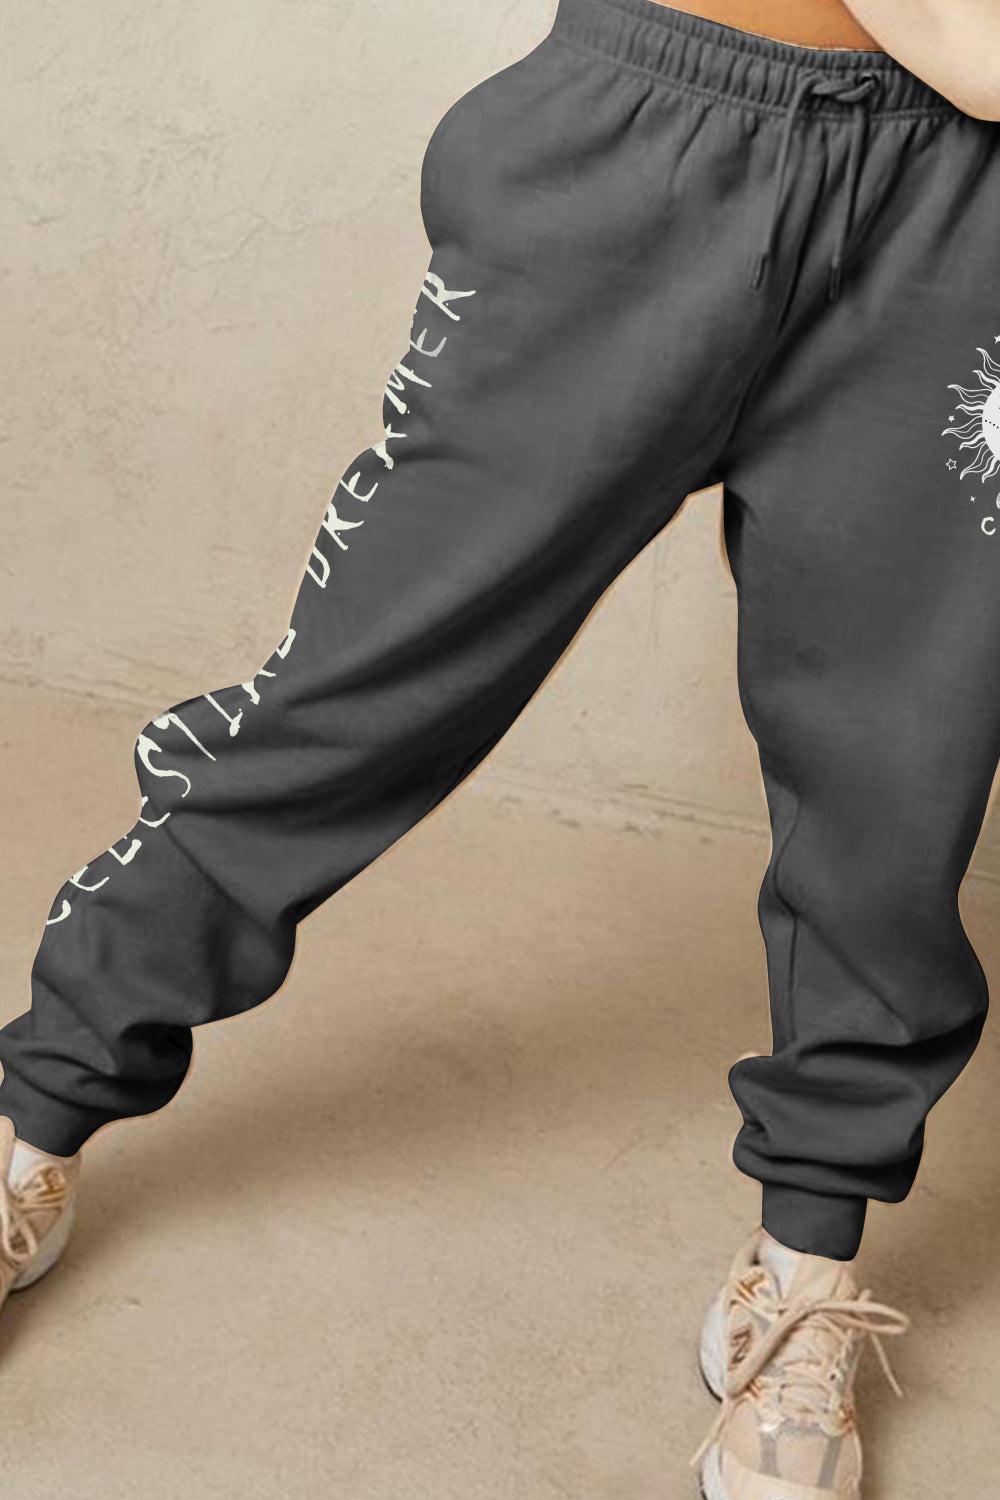 Simply Love Full Size CELESTIAL DREAMER Graphic Sweatpants BLUE ZONE PLANET